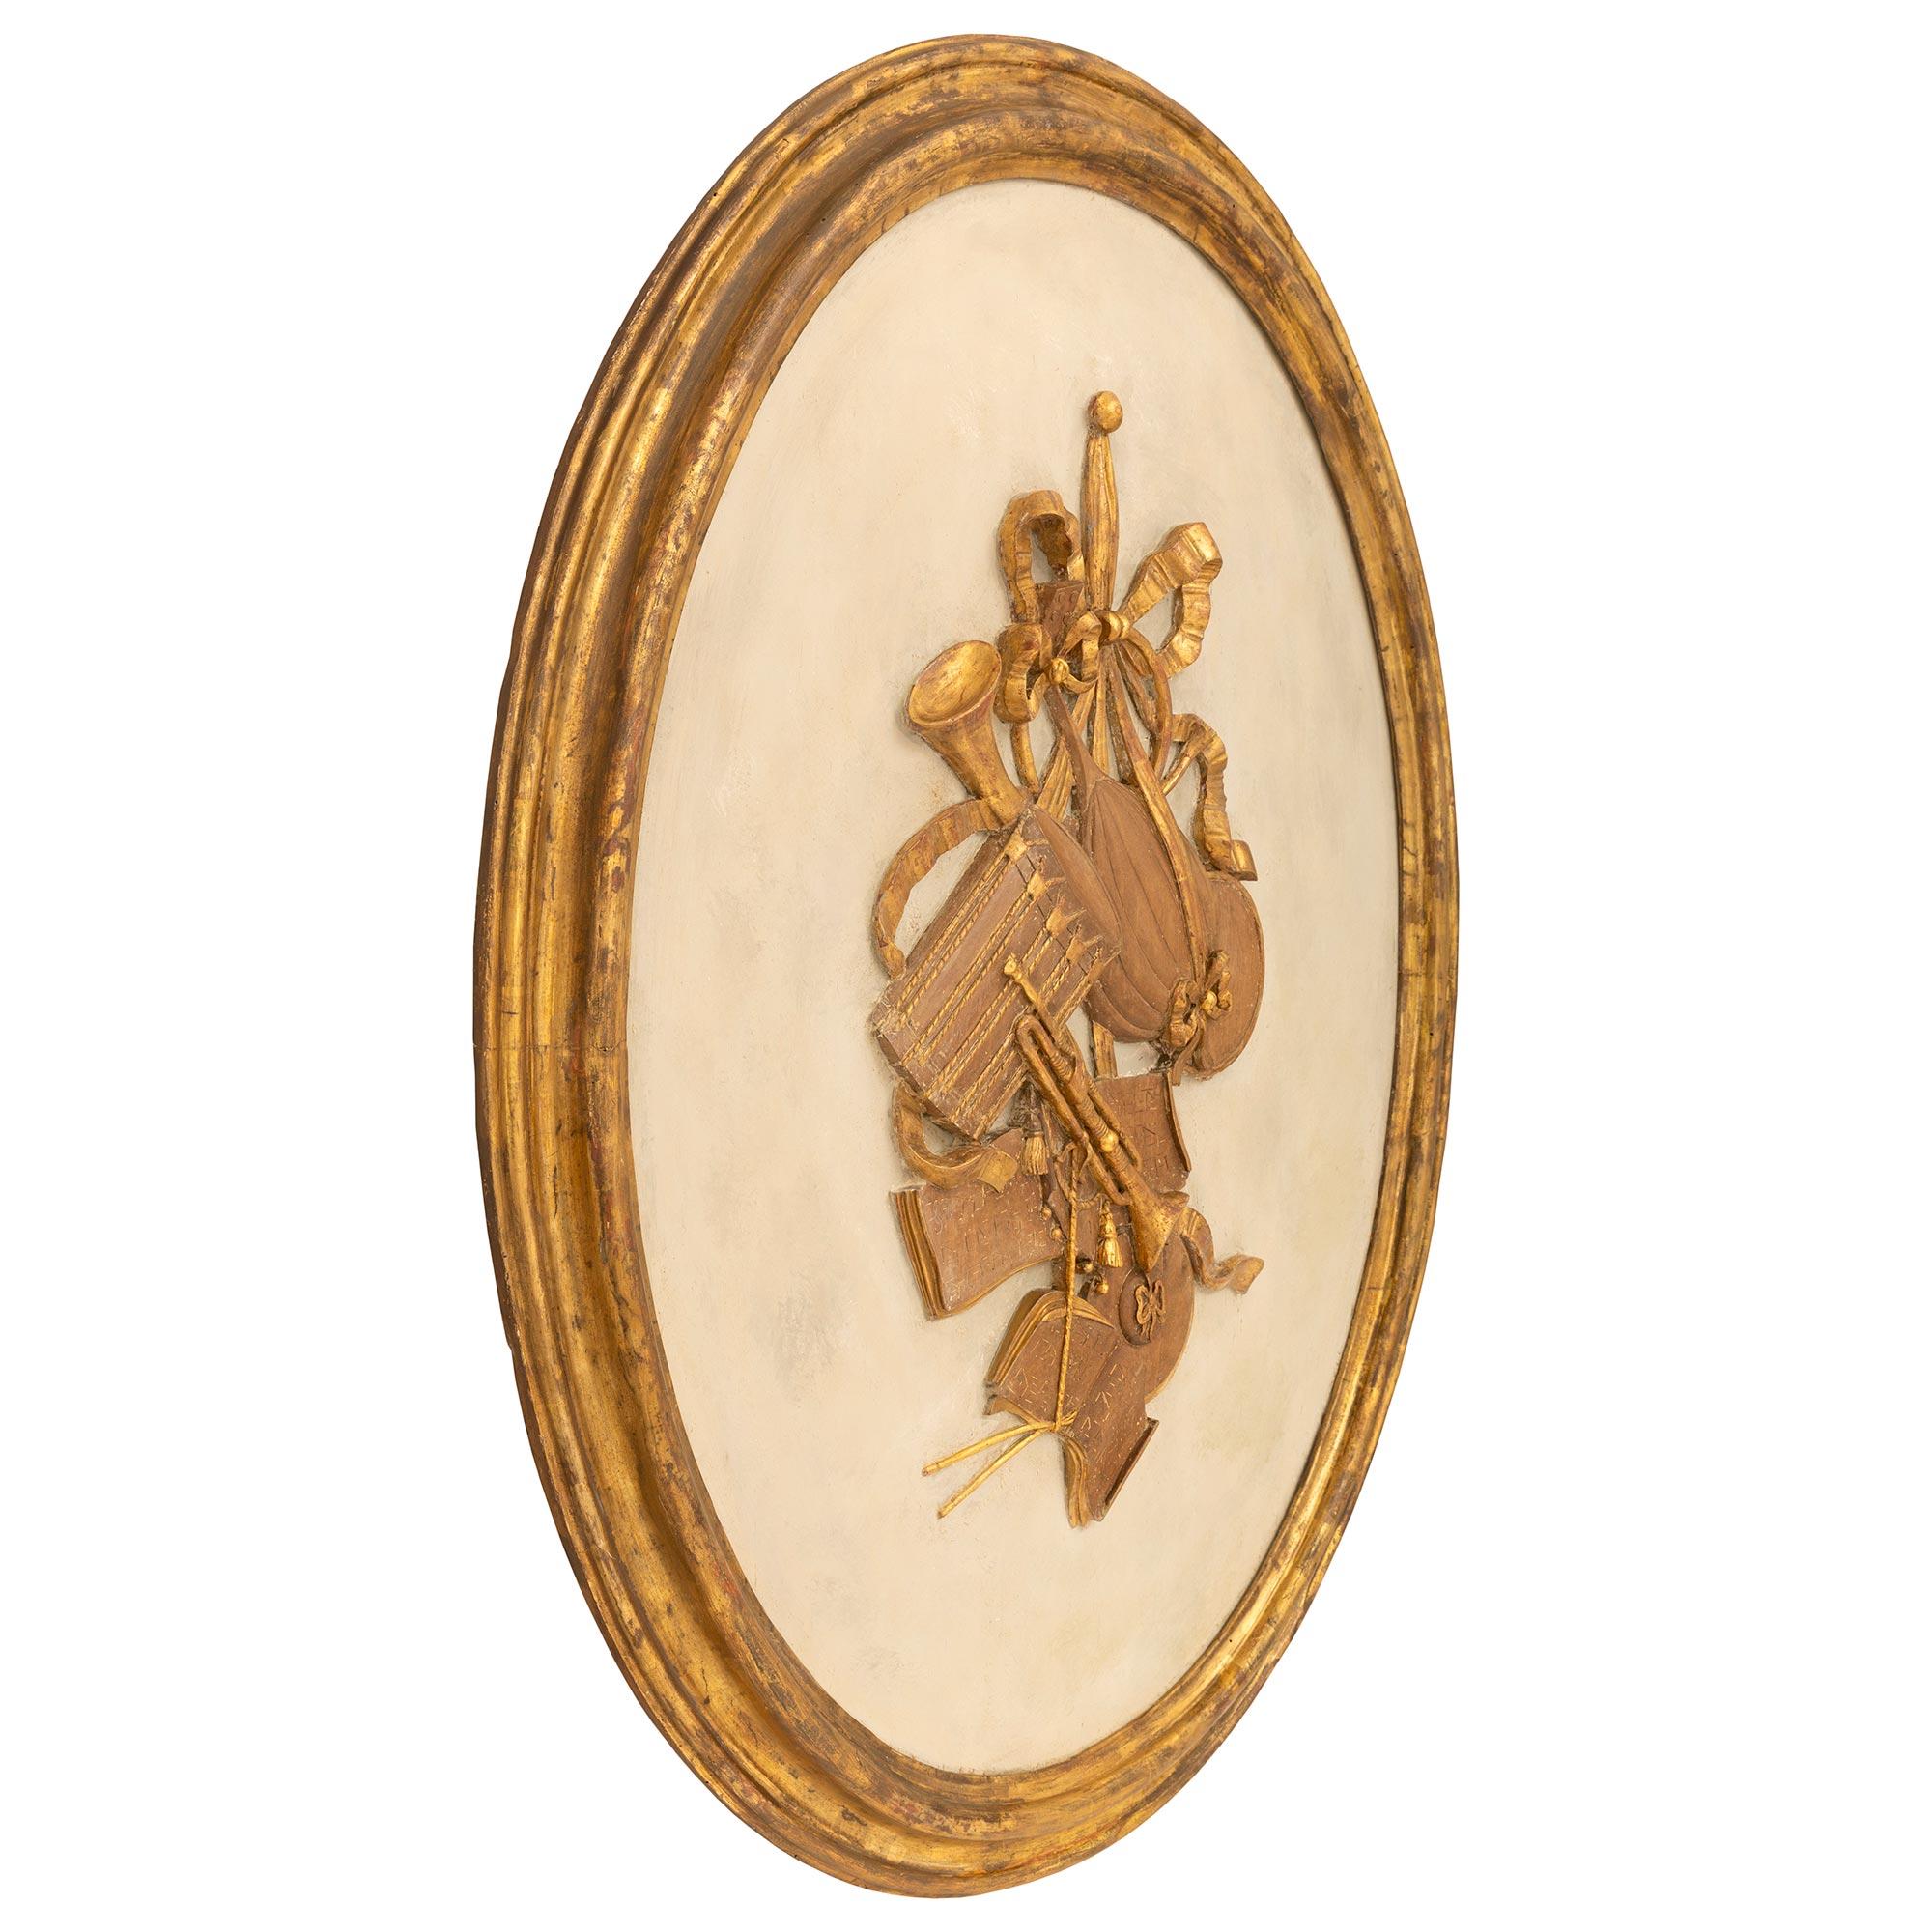 A charming and extremely decorative true pair of Italian 18th century Louis XVI period patinated wood and Mecca wall plaques. Each large scale oval plaque is framed within an elegant mottled Mecca border centering the beautiful patinated off white